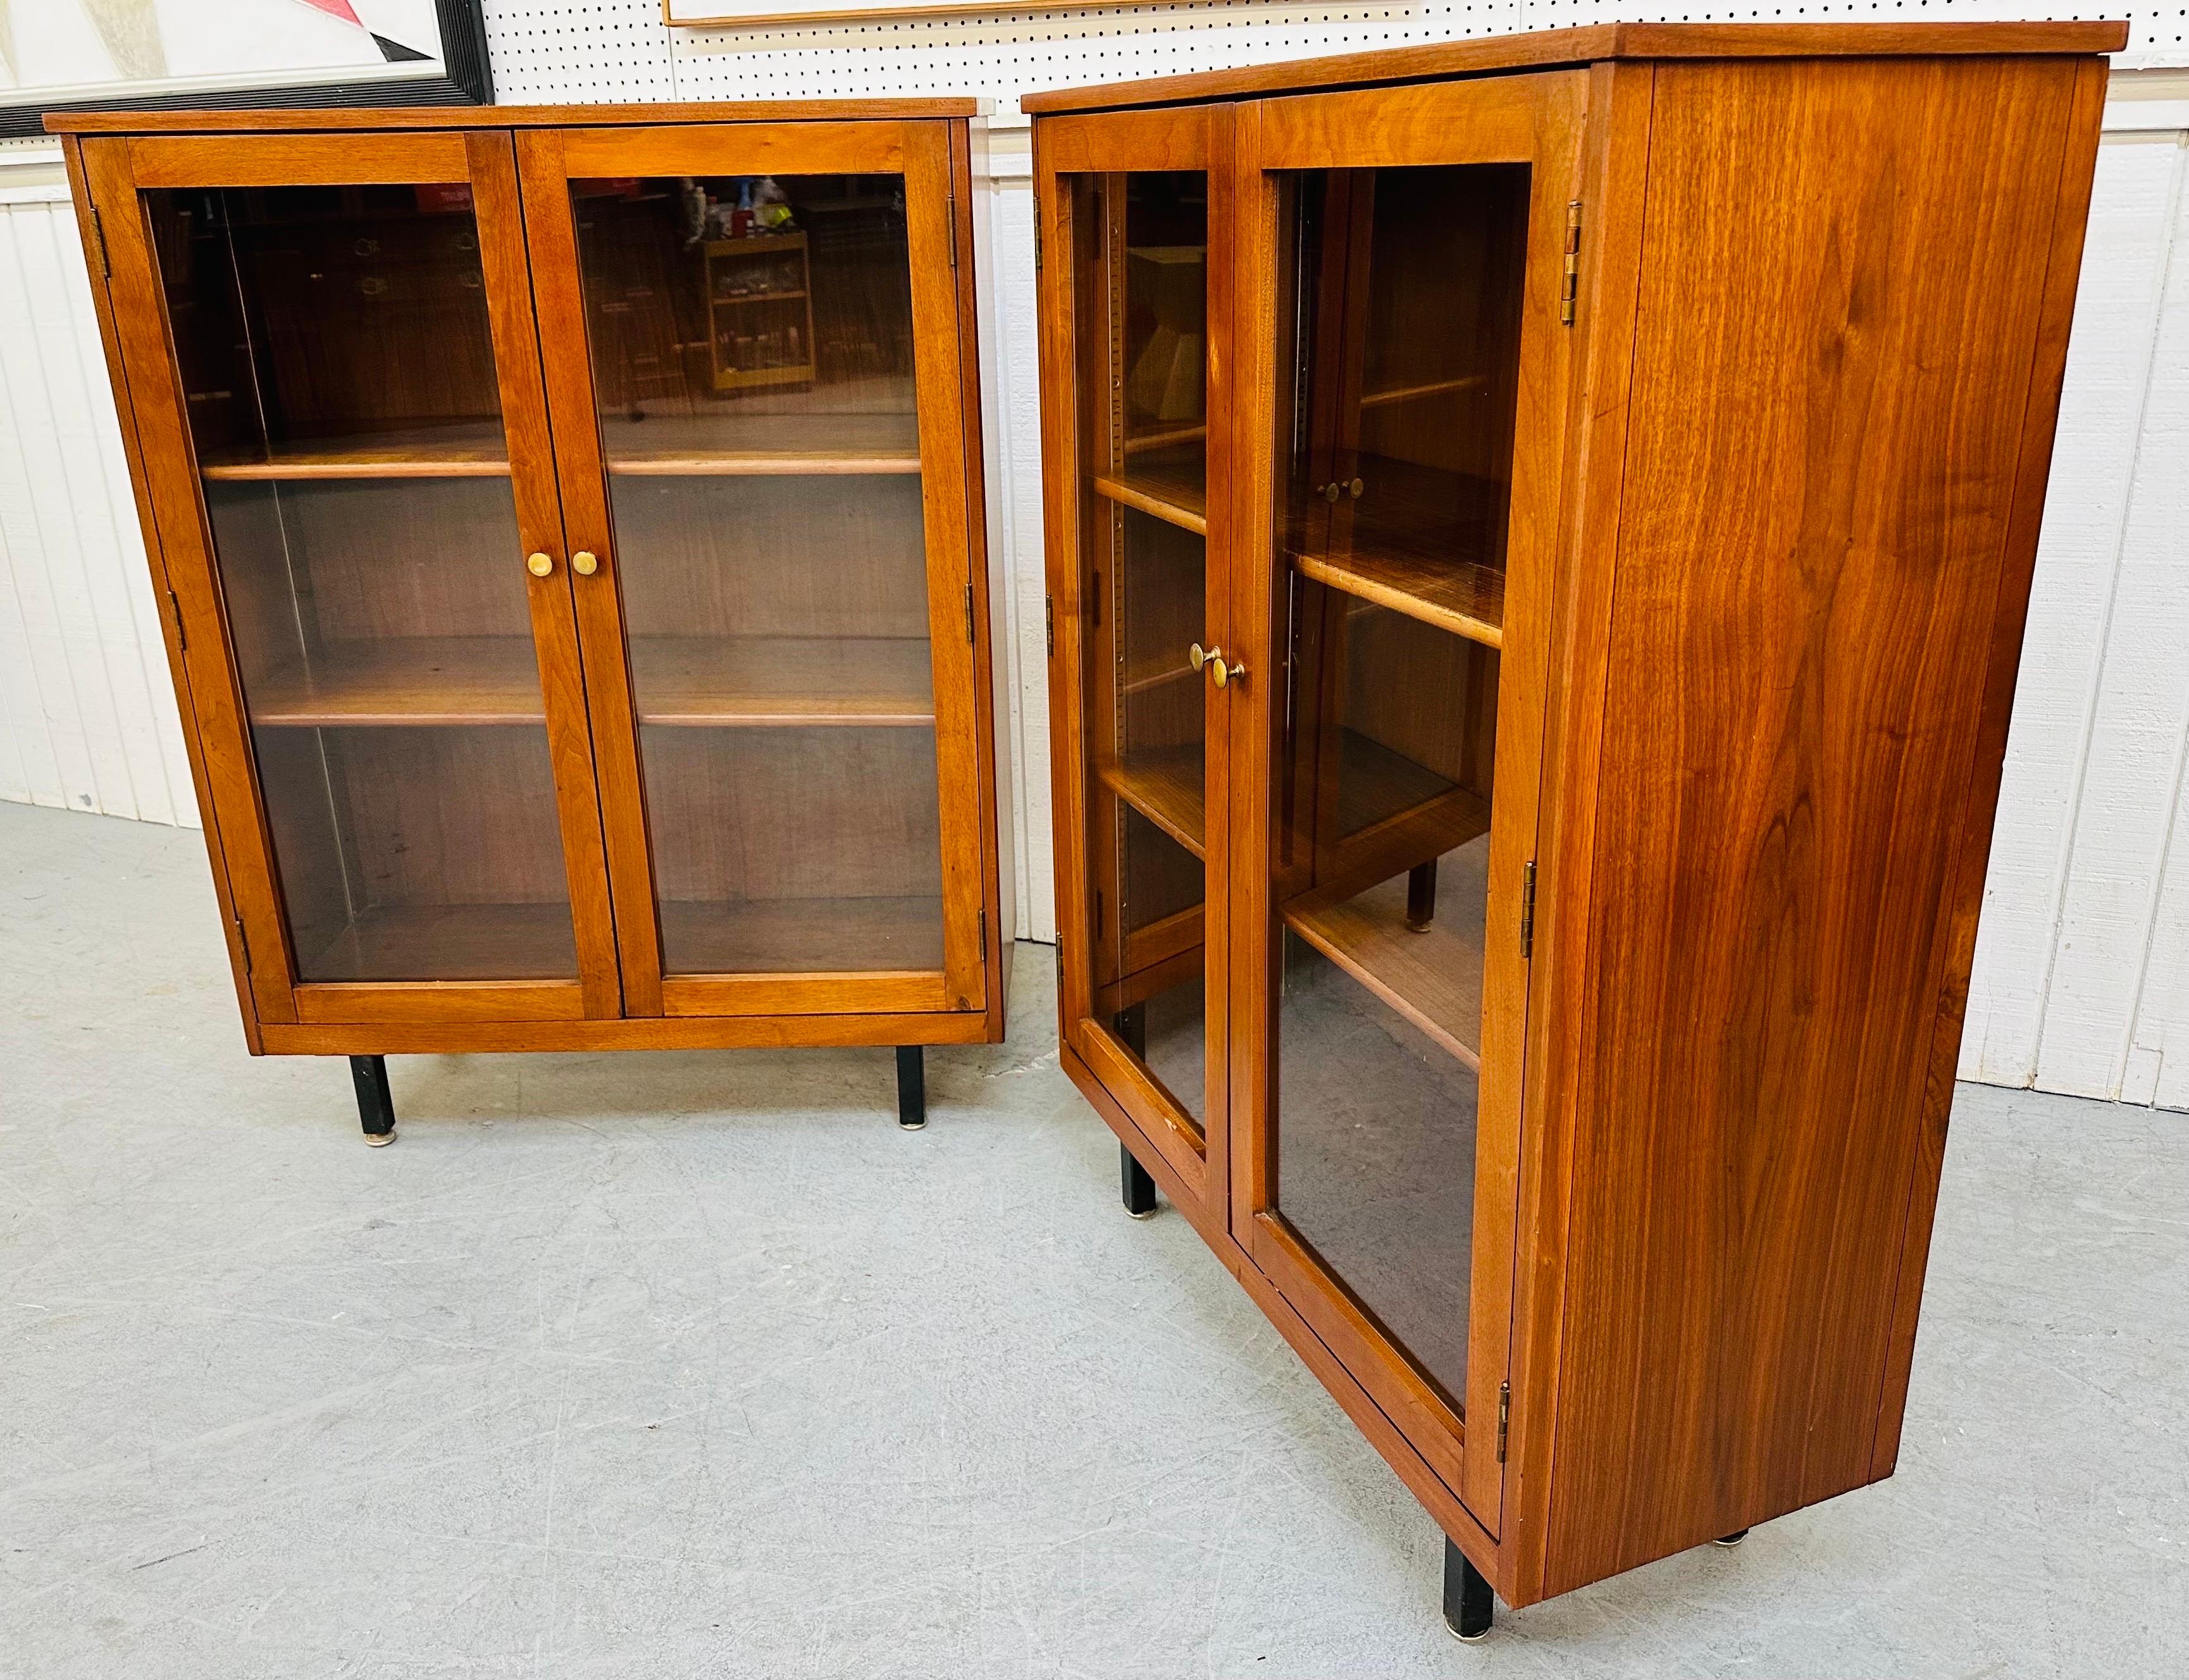 This listing is for a pair of Mid-Century Modern walnut bookcases. This matched pair features glass doors, two adjustable shelves, original pulls, black industrial legs, and a walnut finish.